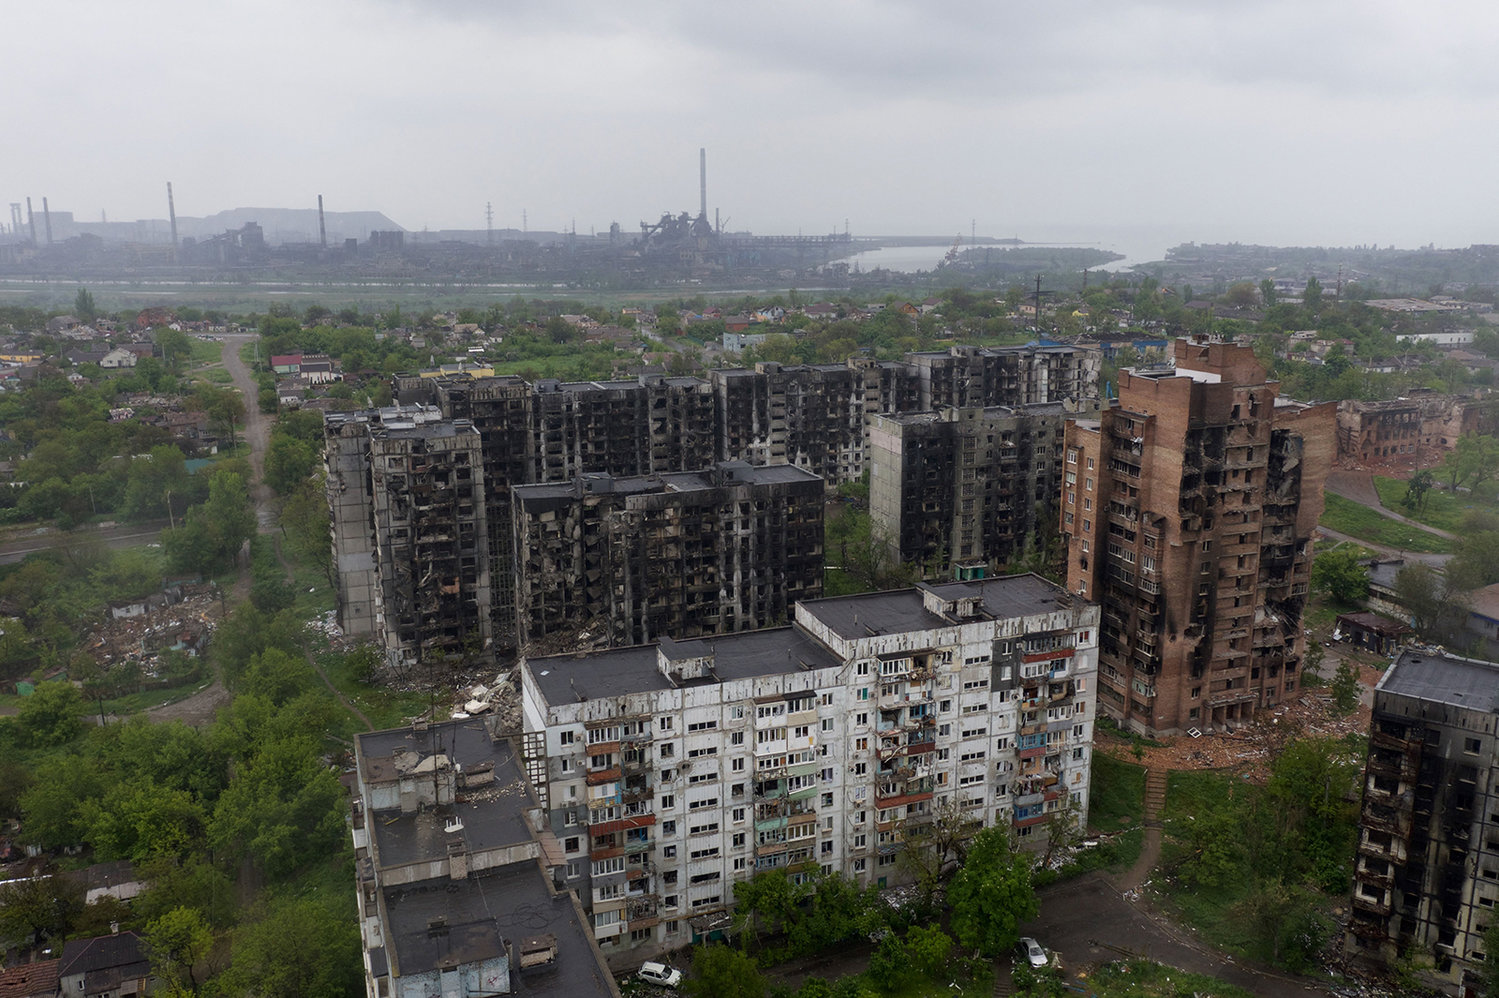 An aerial view of damaged residential buildings and the Azovstal steel plant in the background in the port city of Mariupol, Ukraine, on May 18, 2022, amid the ongoing Russian military action. (Andrey Borodulin/AFP via Getty Images/TNS)